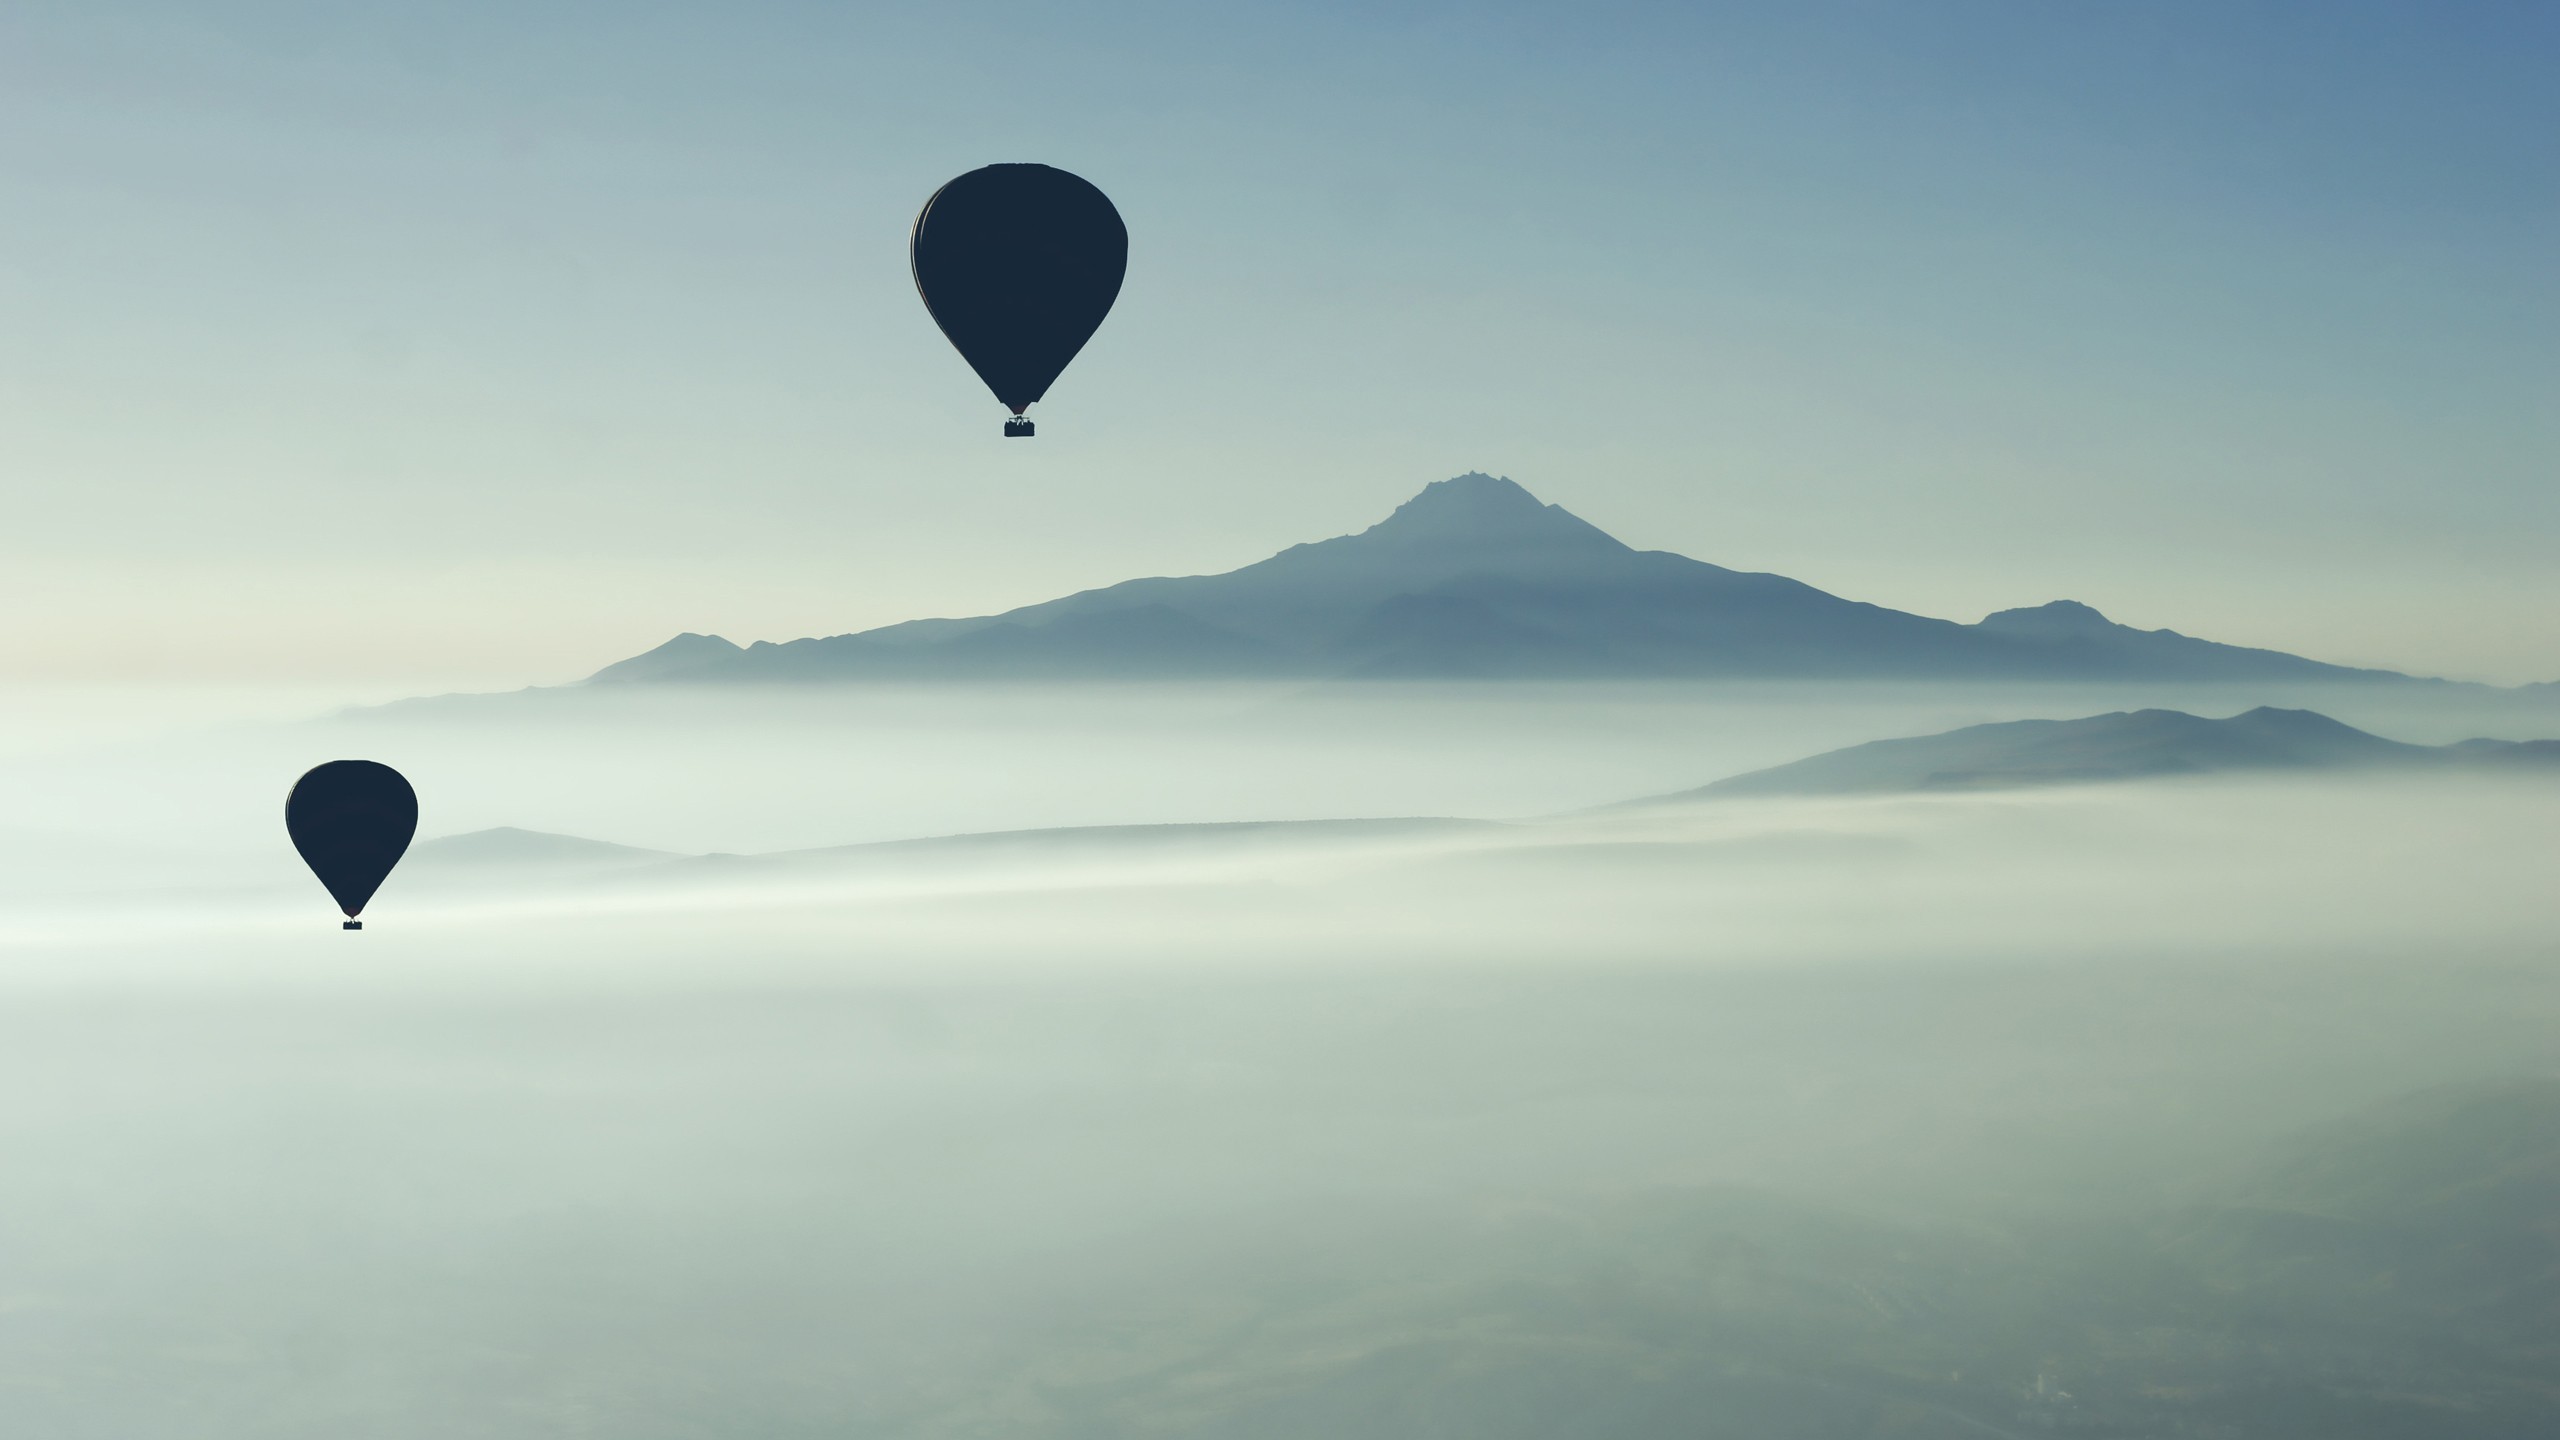 General 2560x1440 nature mountains hot air balloons landscape vehicle